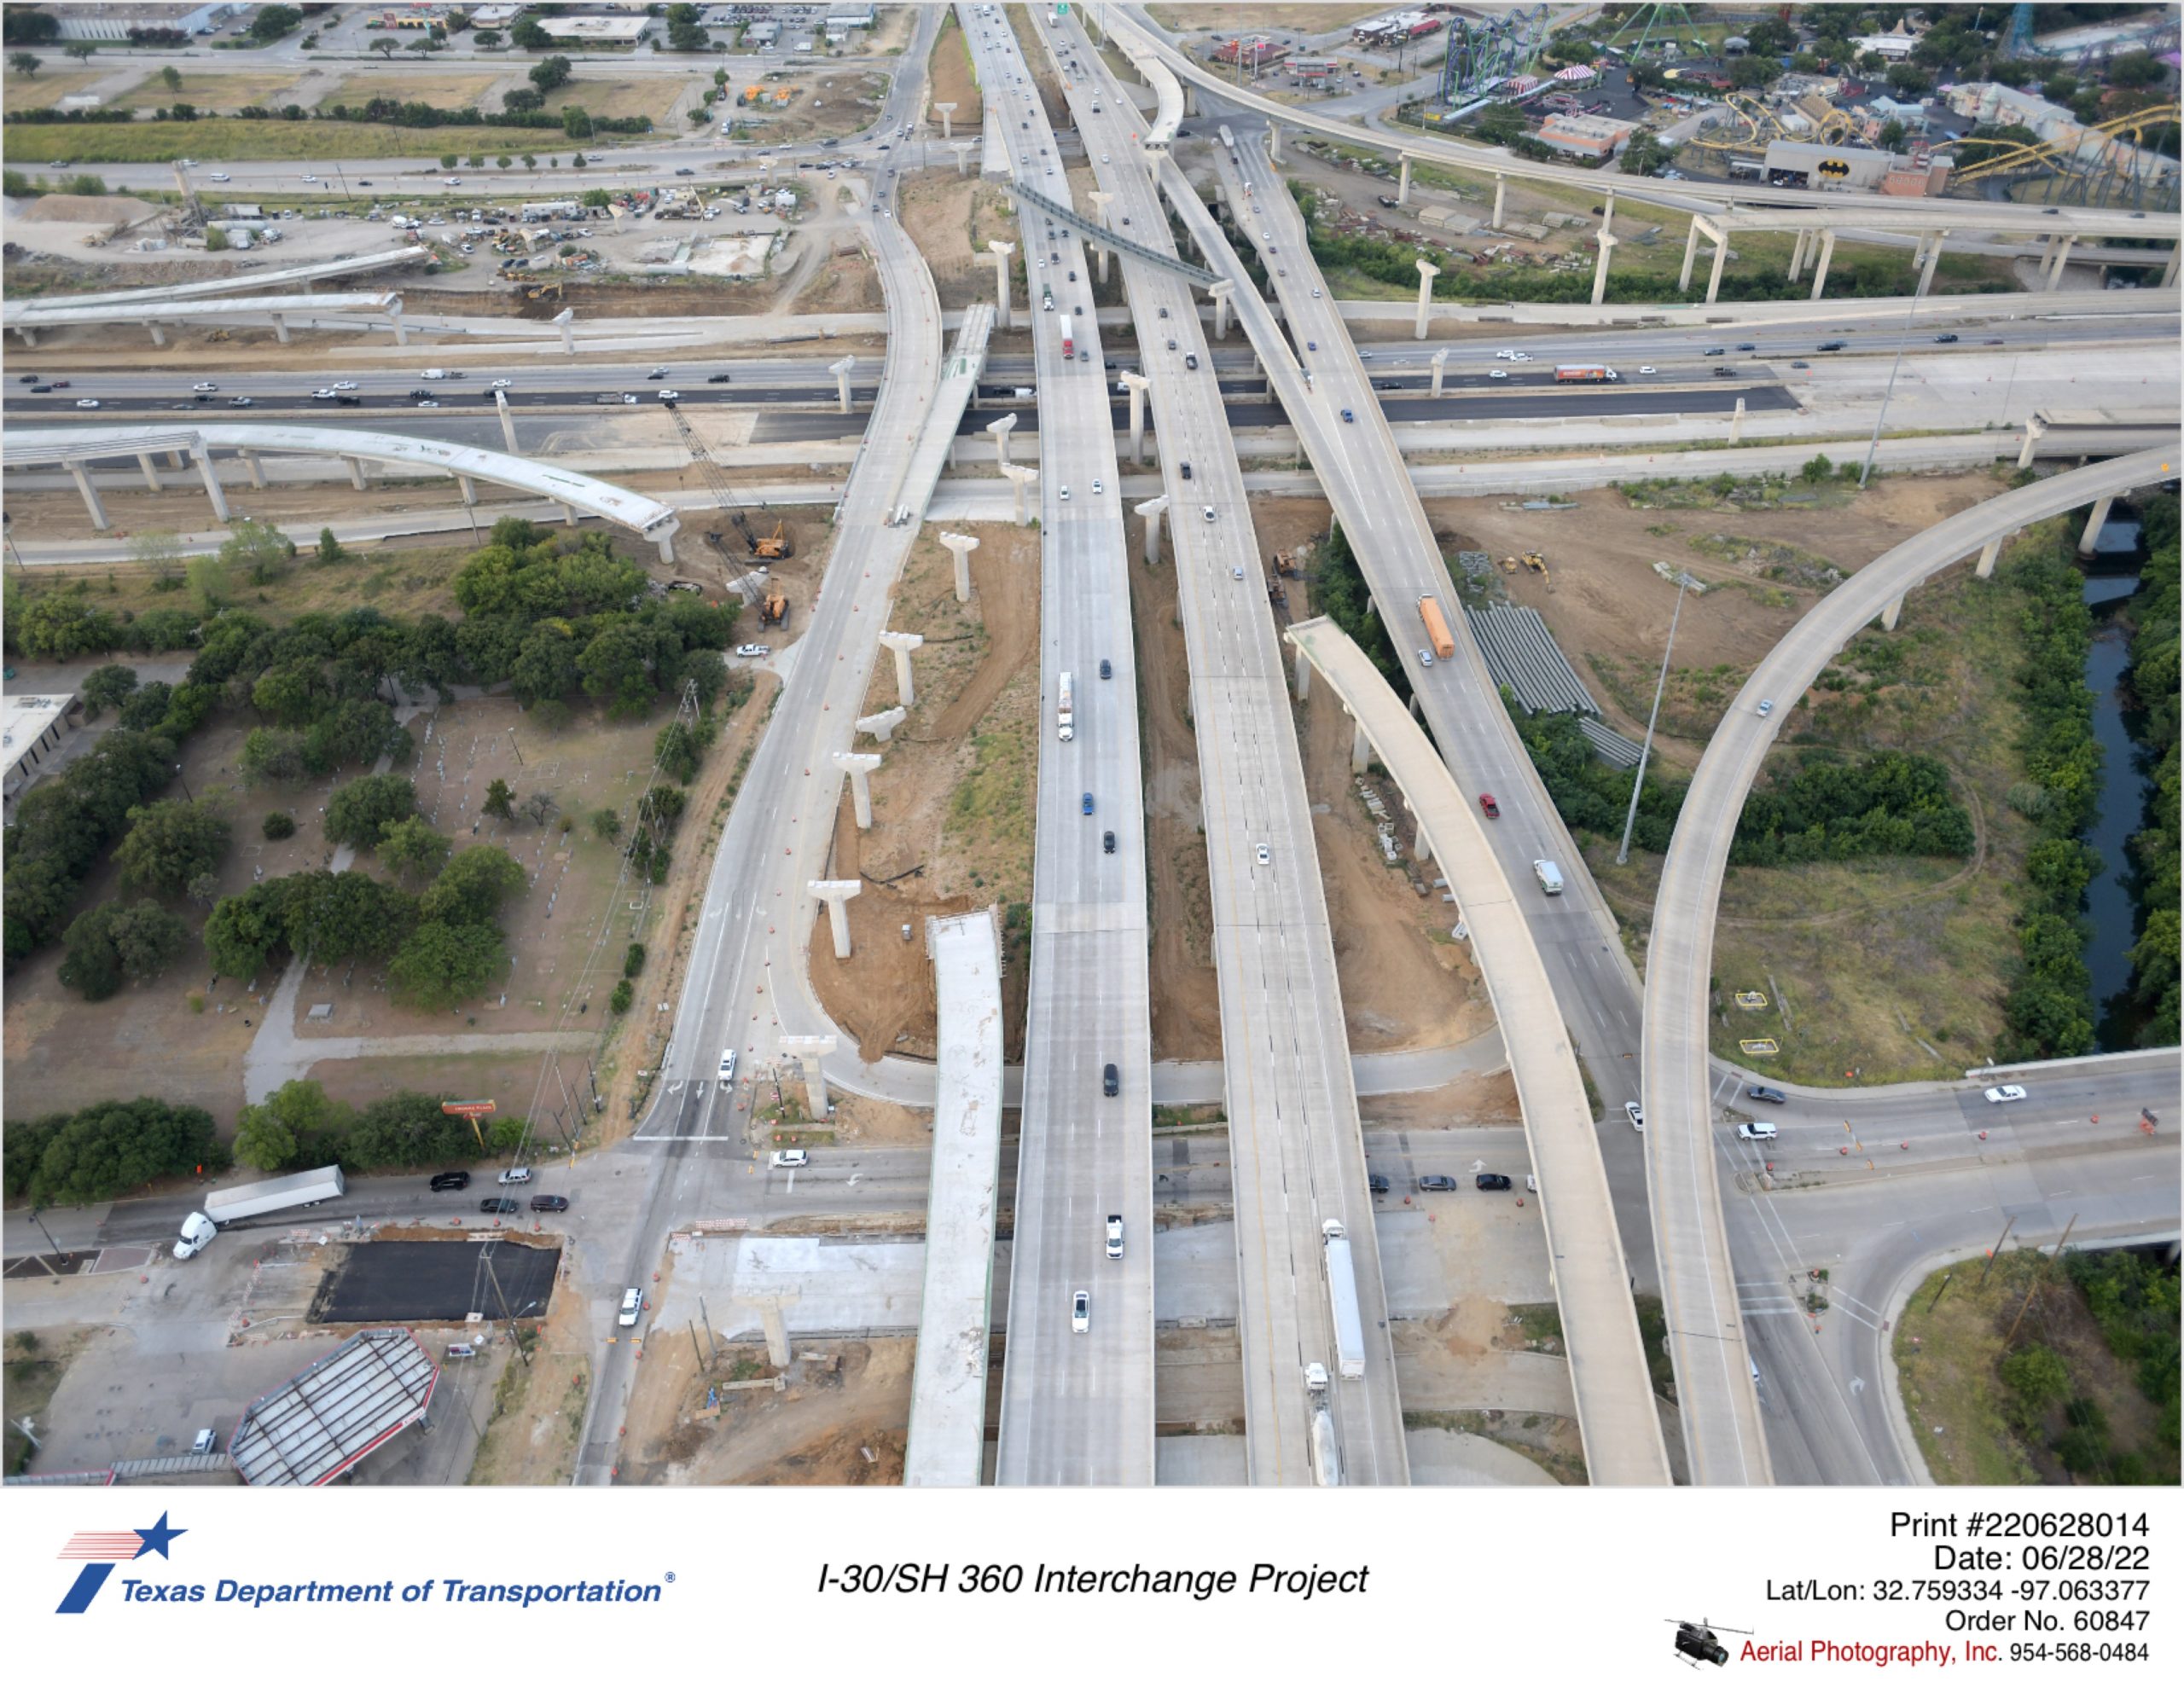 I-30/SH 360 interchange looking south over Lamar Blvd. Construction of westbound Lamar Blvd pavement and partially constructed direct connectors is shown.